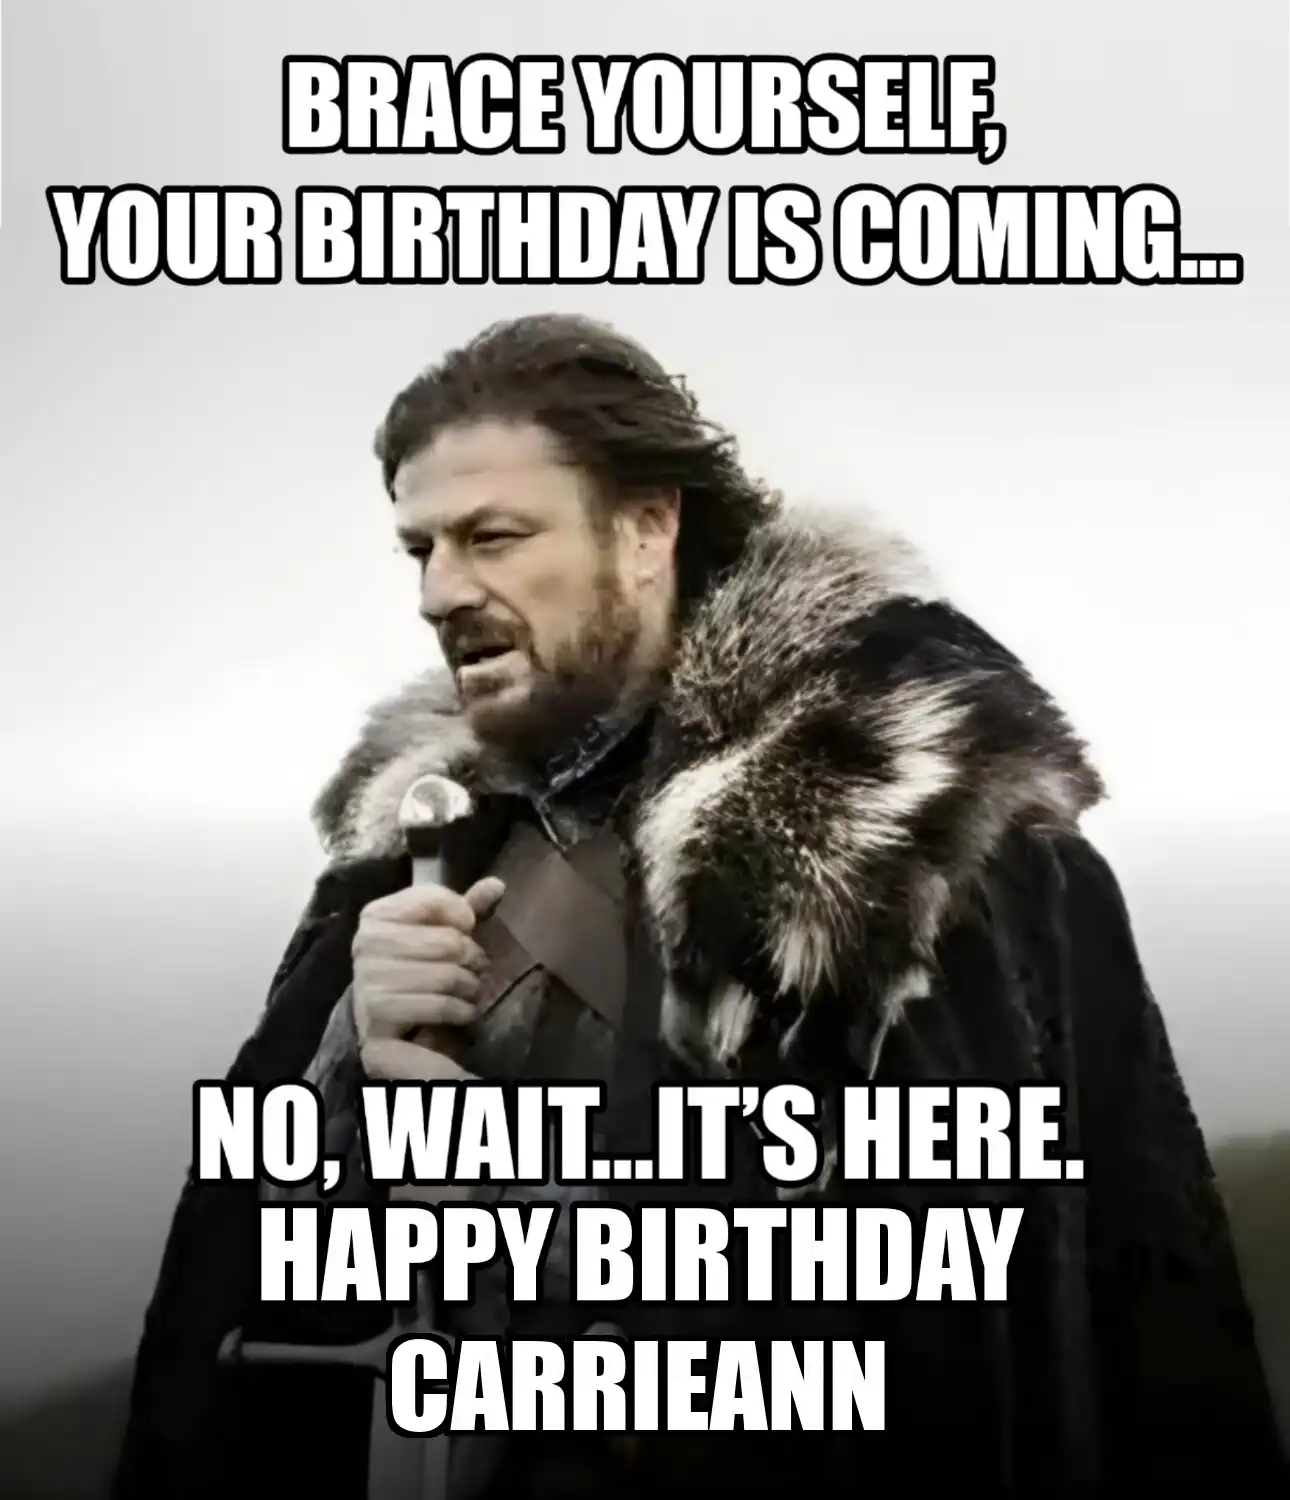 Happy Birthday Carrieann Brace Yourself Your Birthday Is Coming Meme